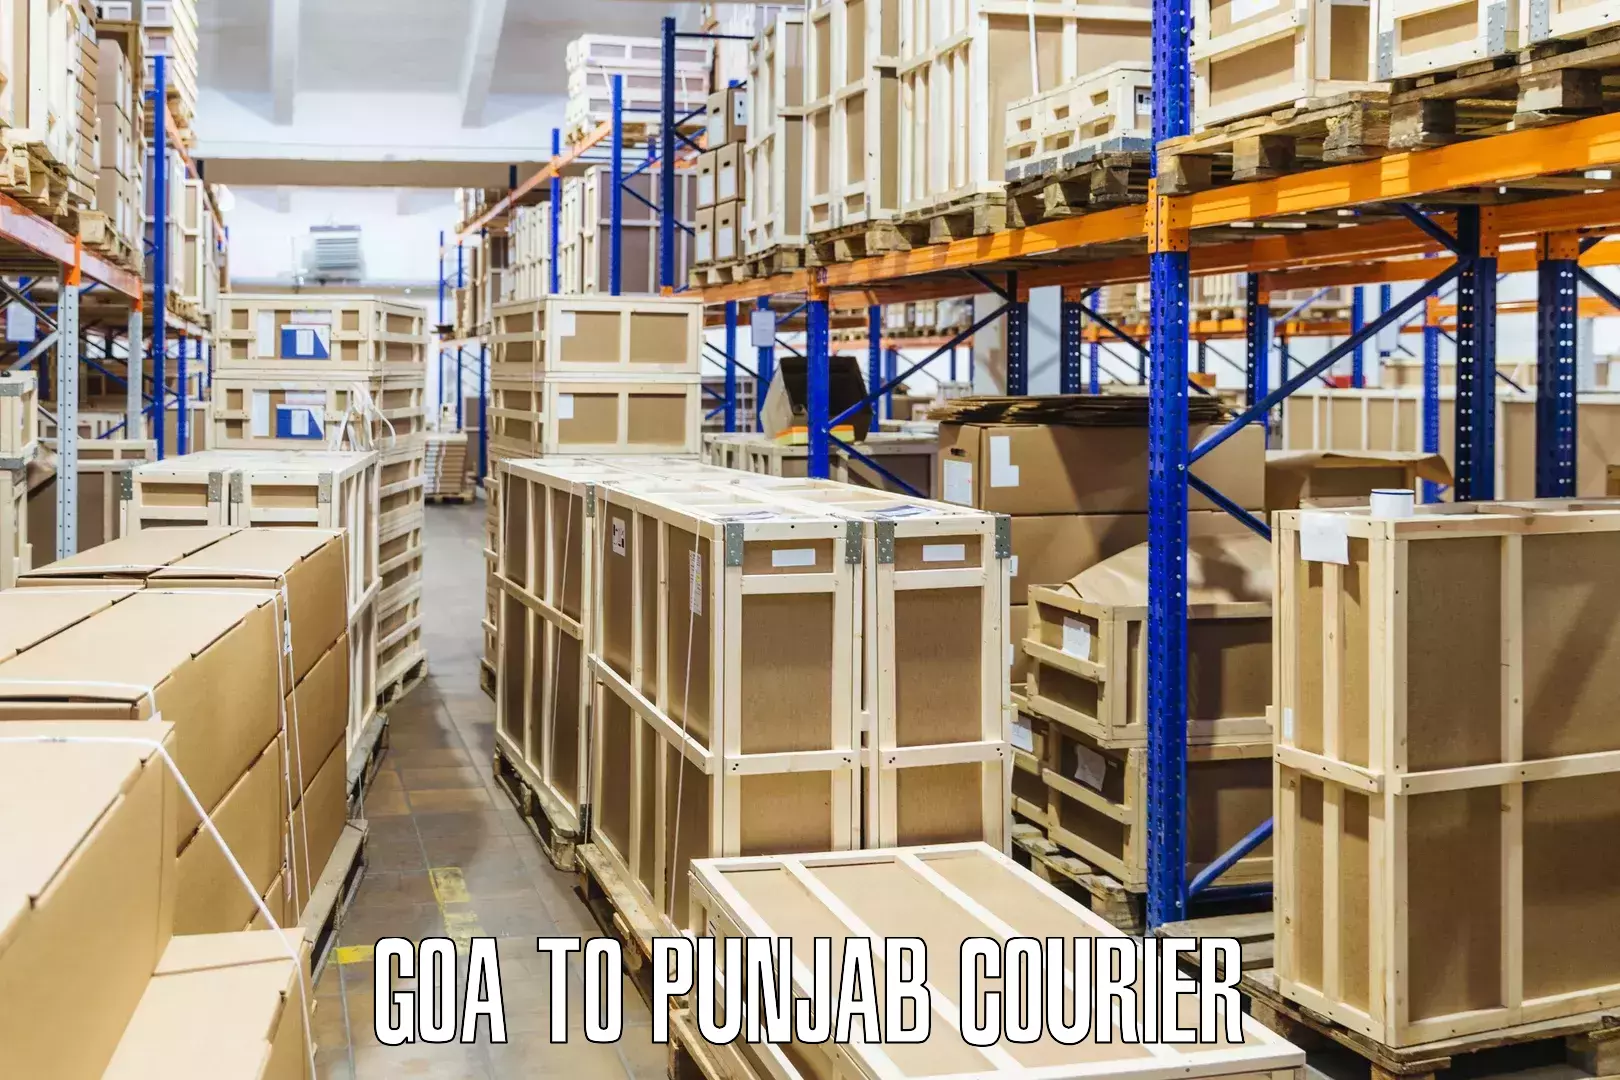 On-call courier service Goa to Punjab